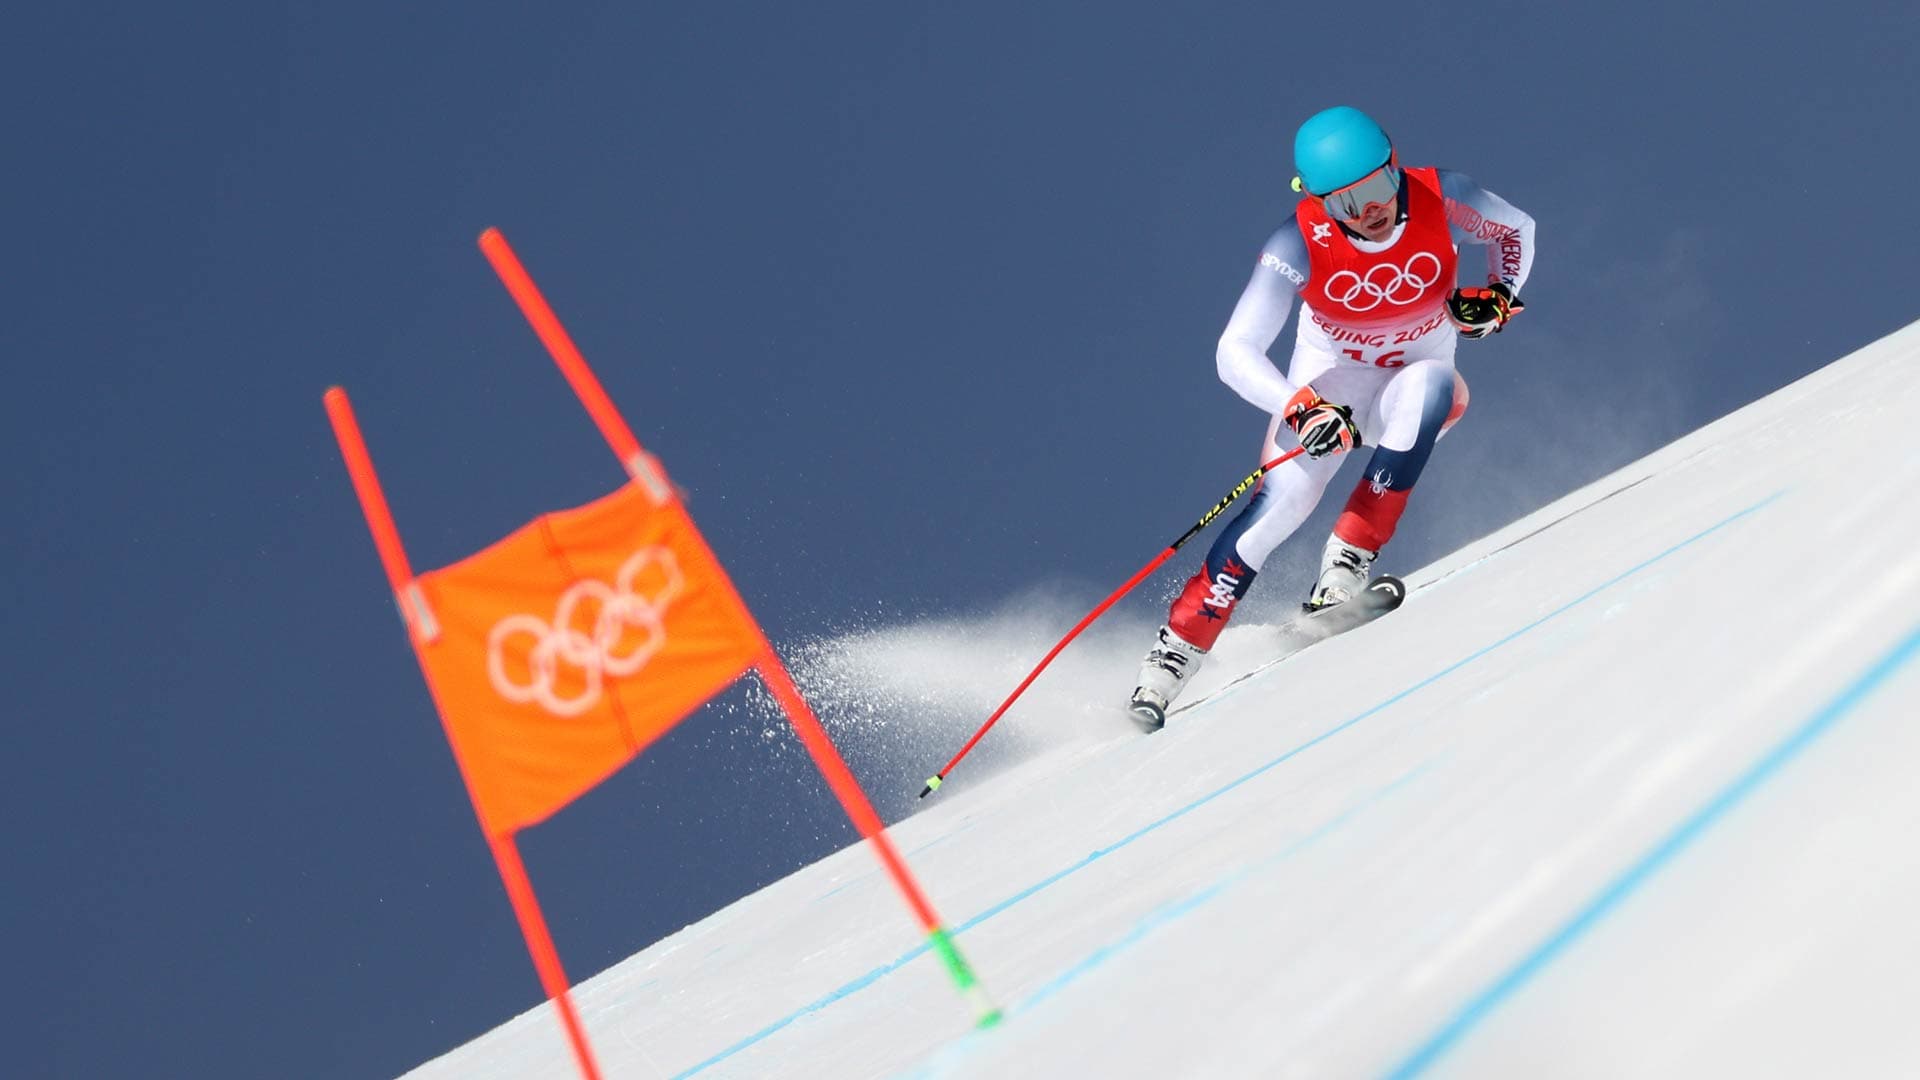 How to watch the Alpine skiing mens super-G on NBC Sports and Peacock